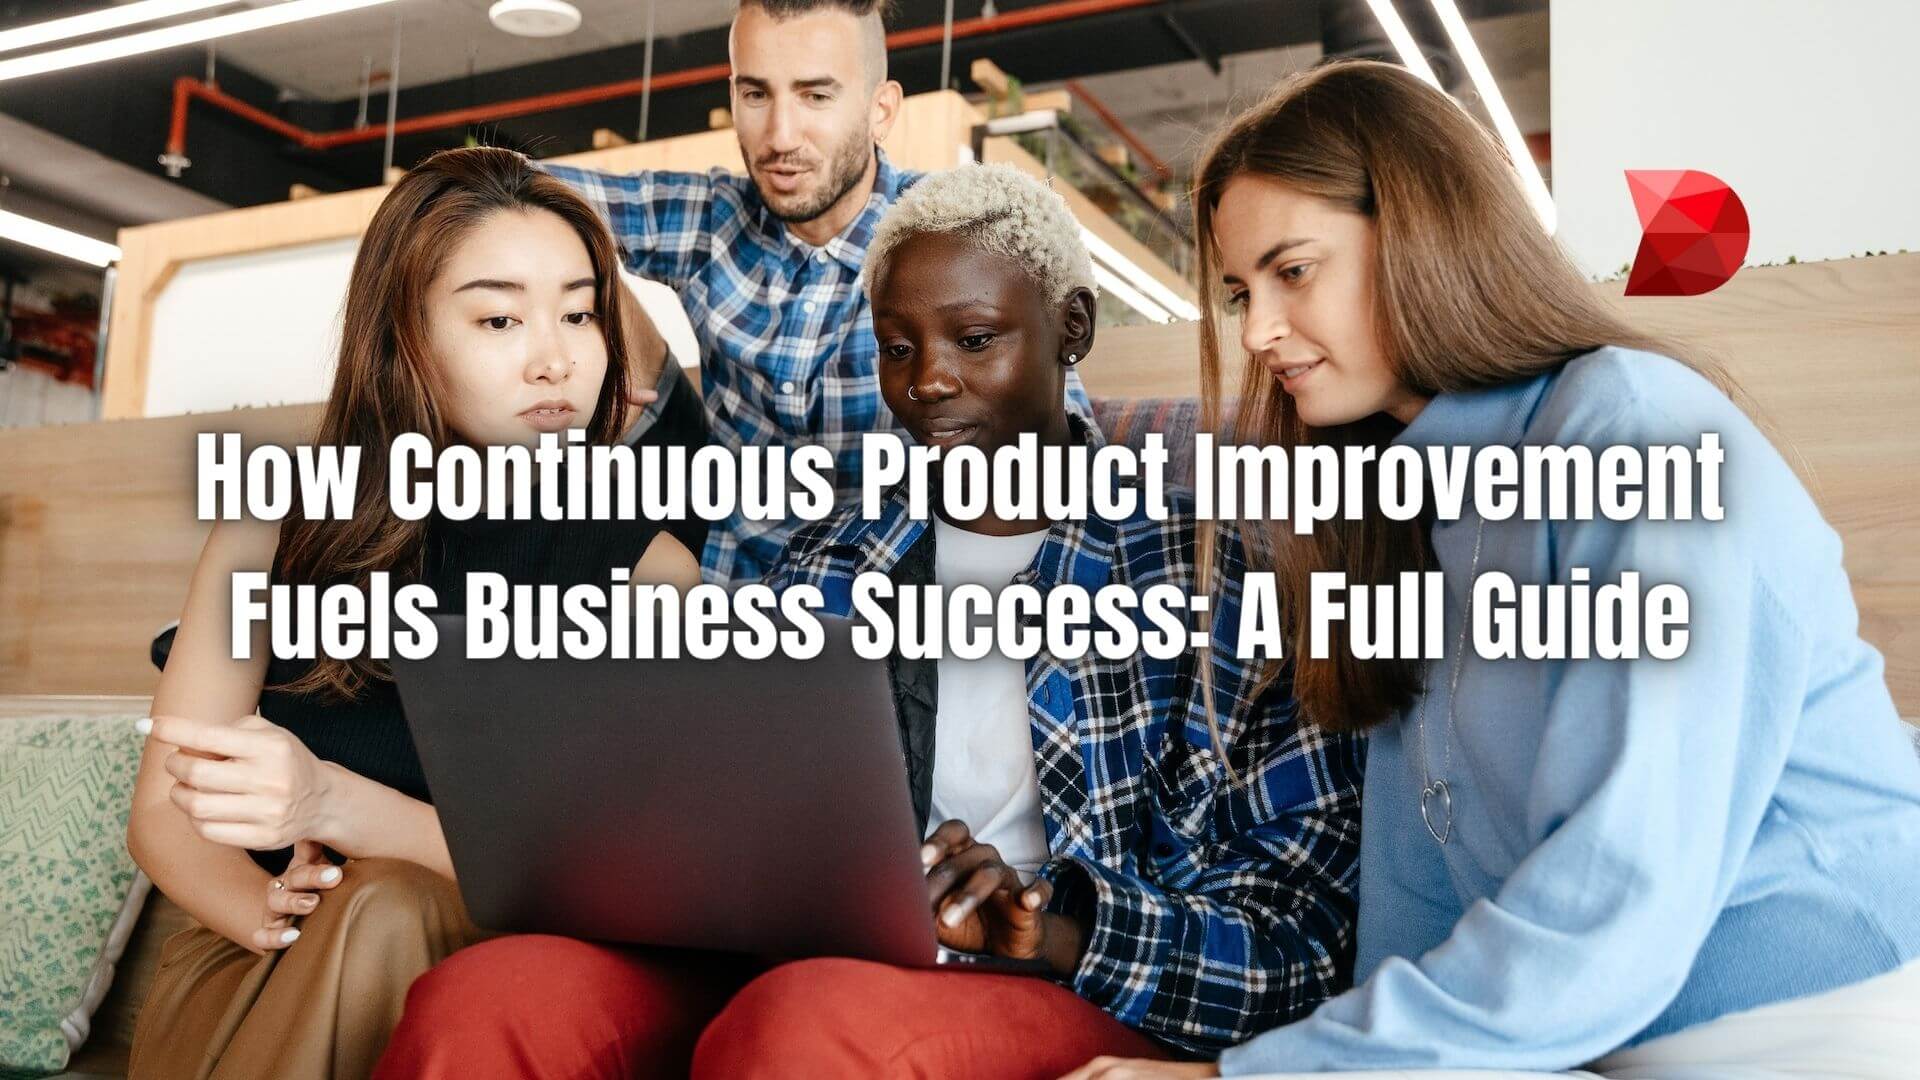 Businesses that don't focus on product improvement will likely fall behind their competitors. Learn more about product improvement!